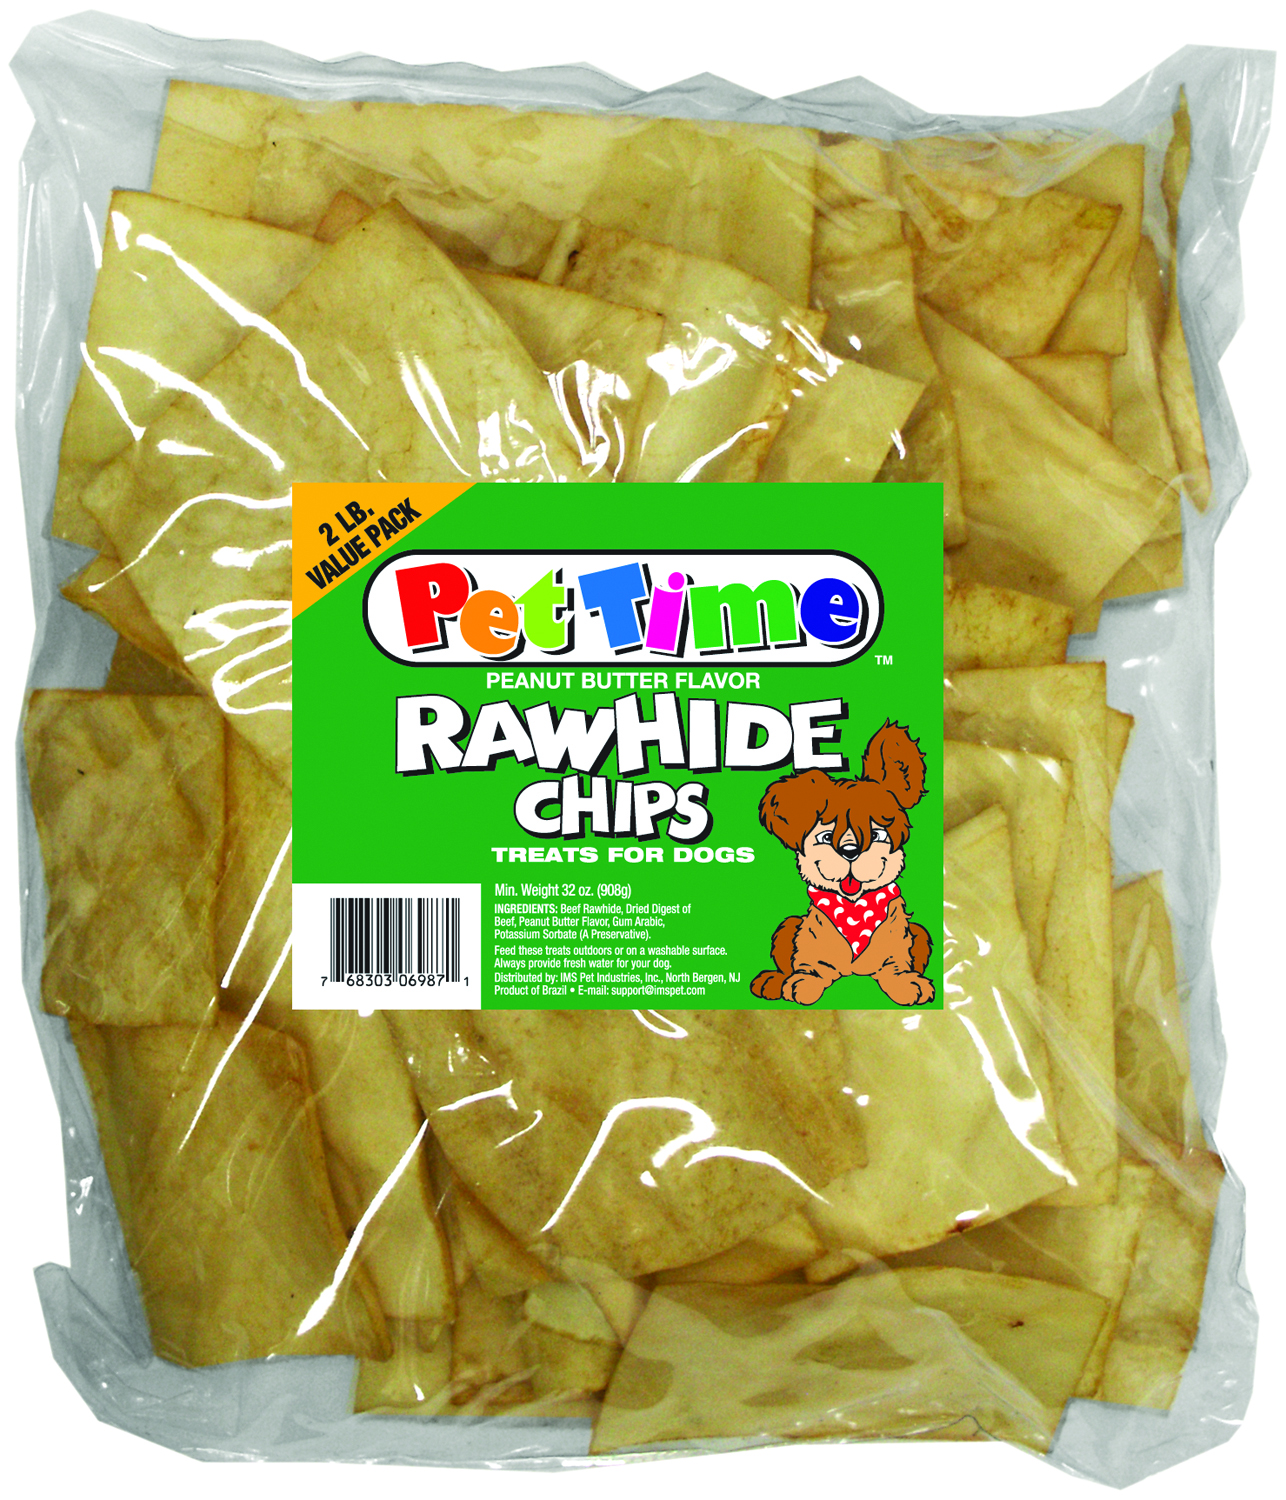 Tasty Peanut Butter Basted Rawhide Chips - 2lbs.